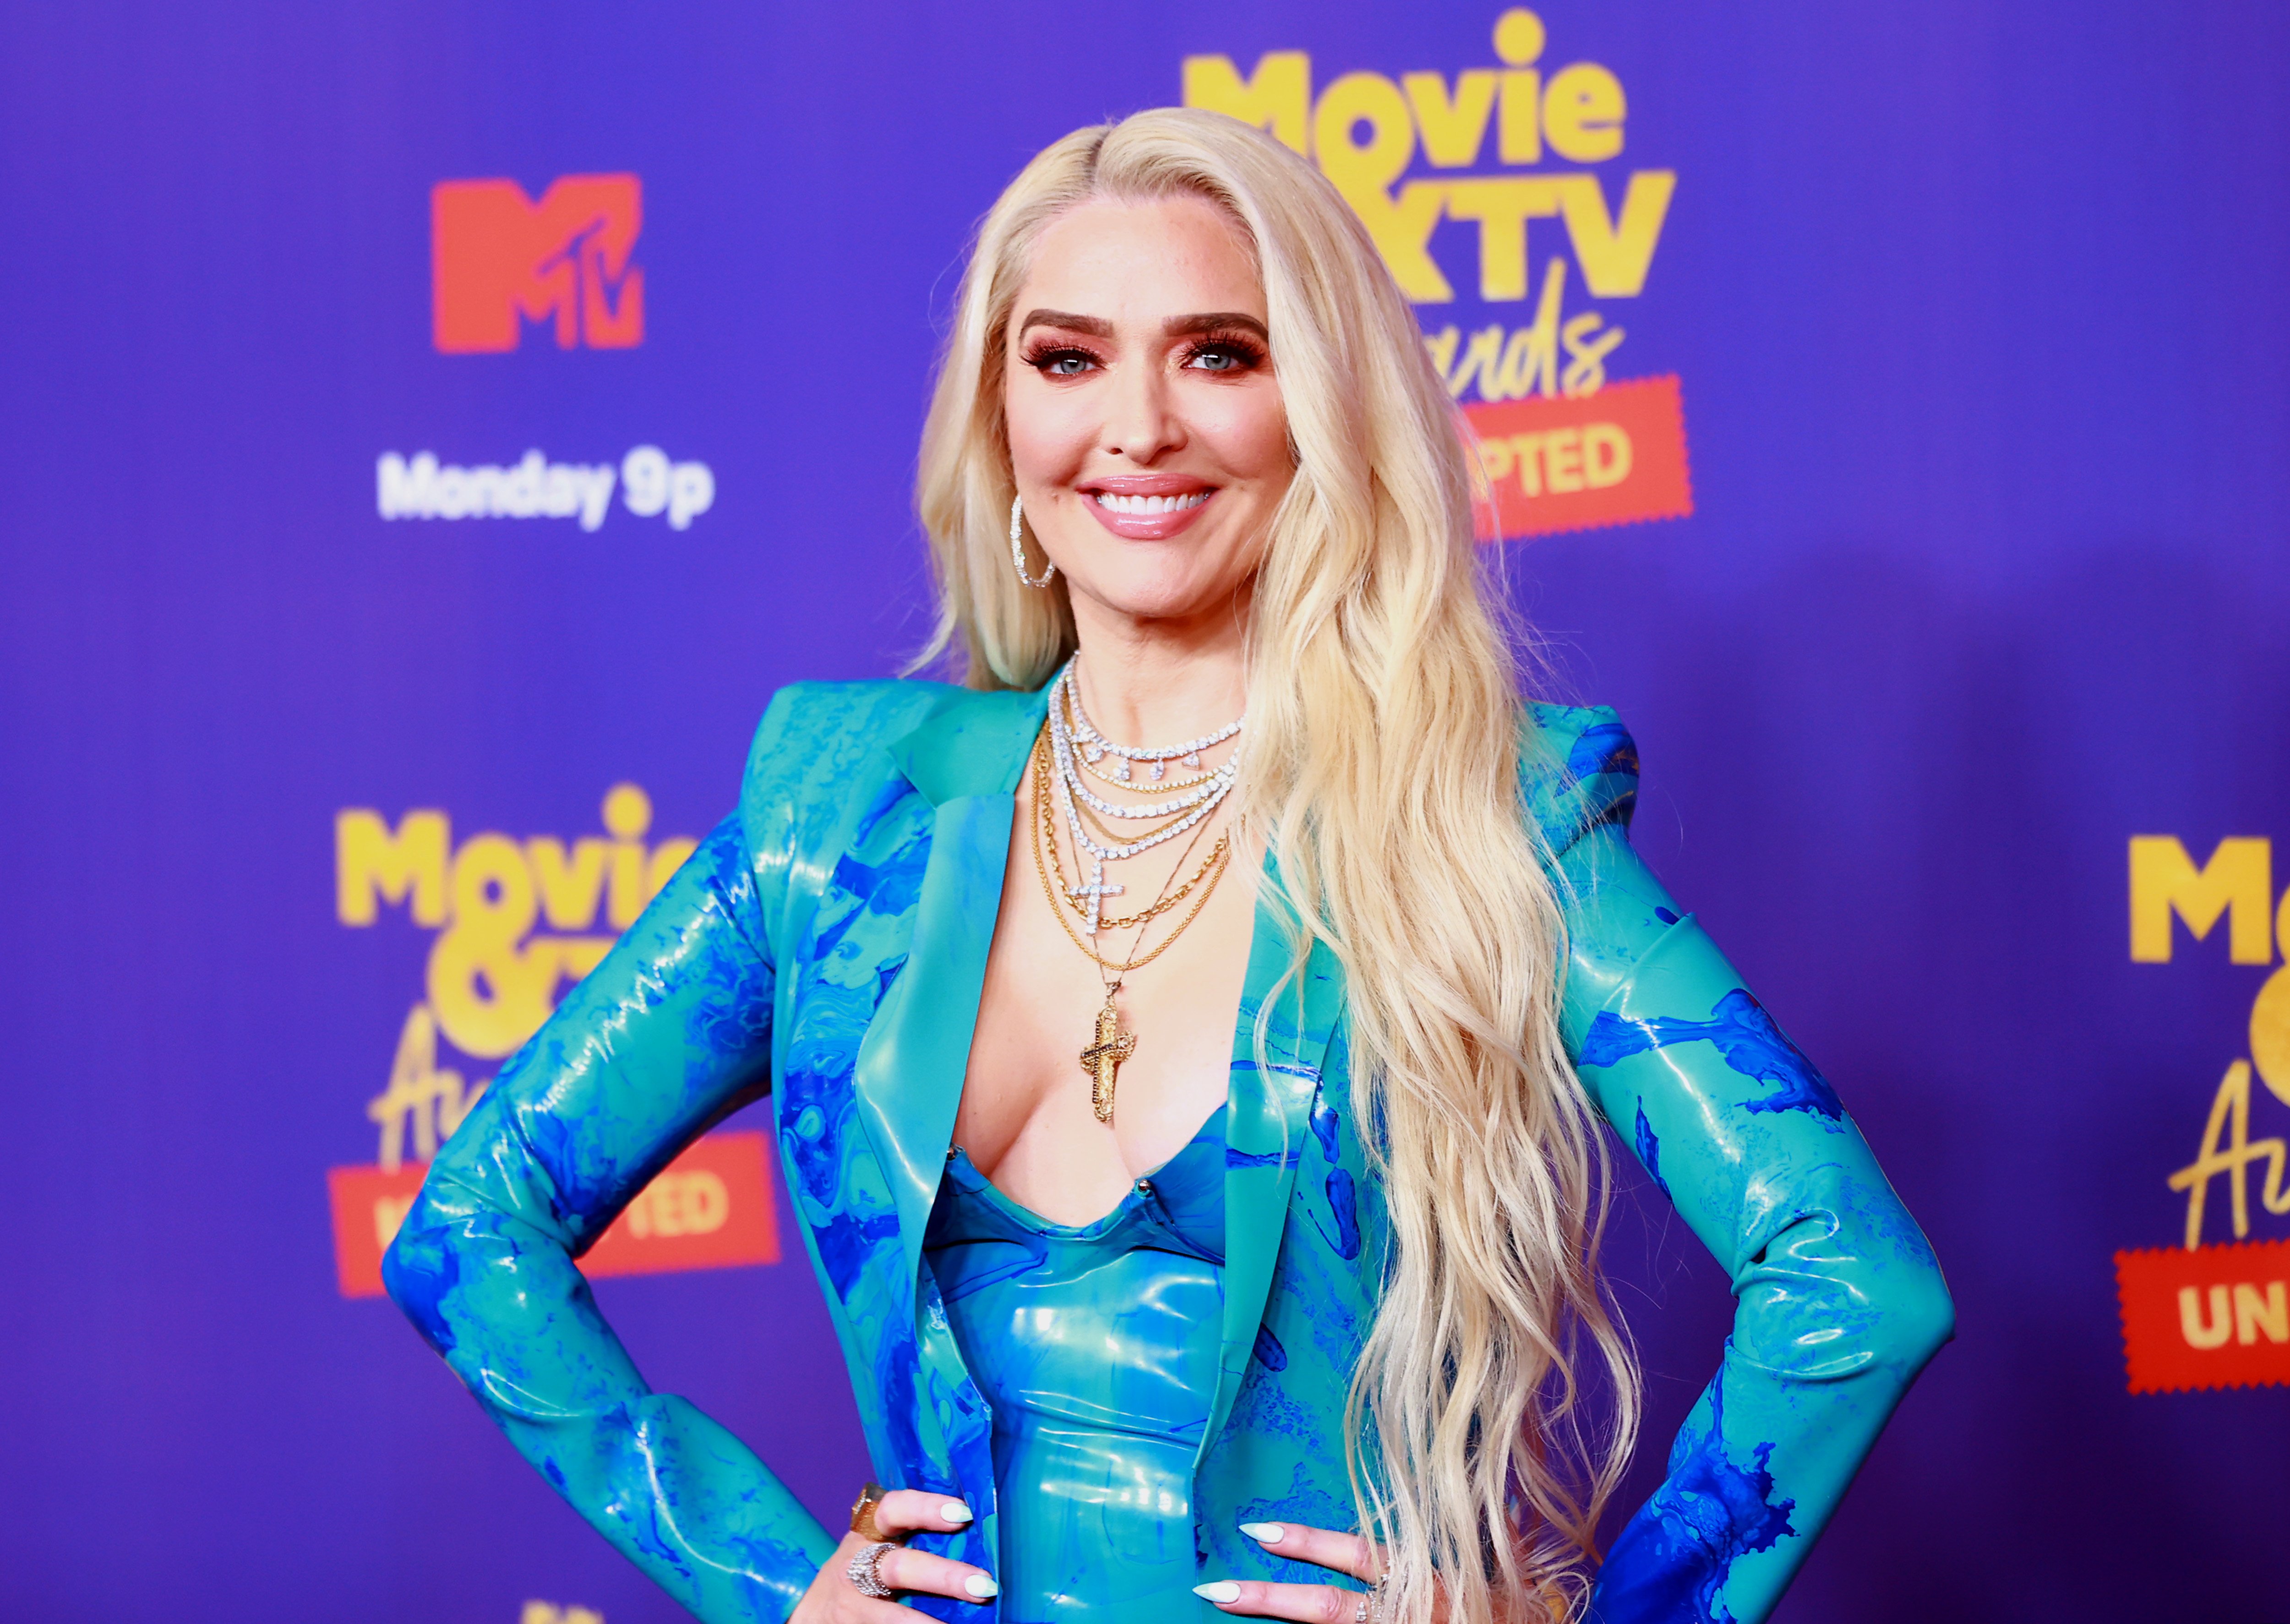 Erika Jayne in a blue outfit.